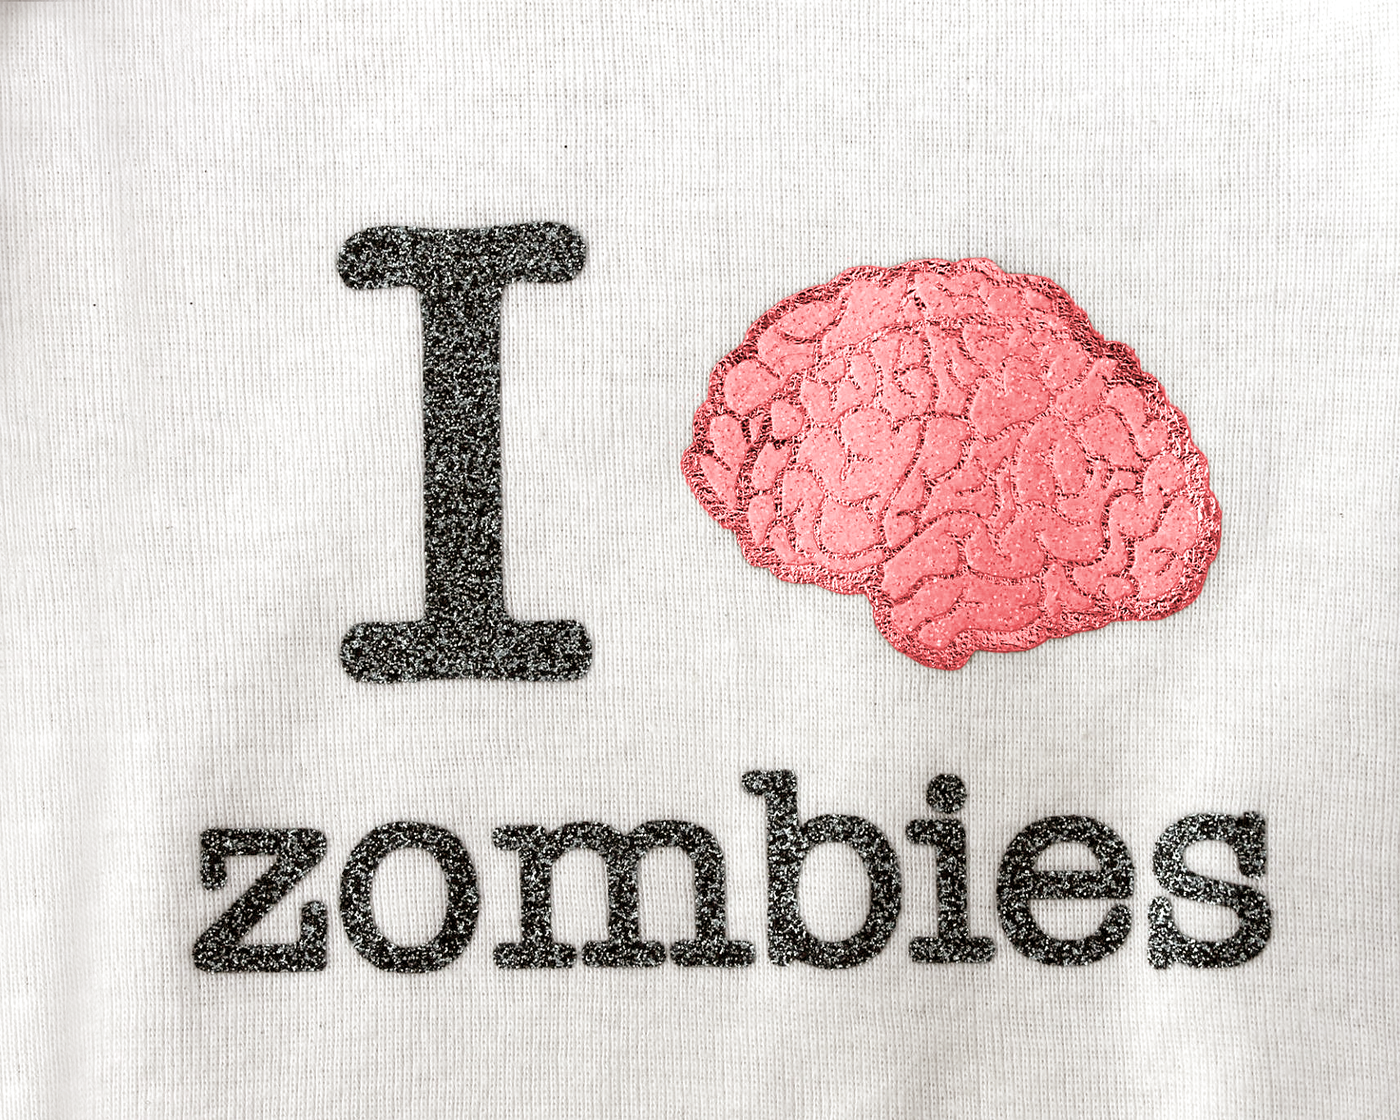 White fabric with a design that has a brain and reads "I [brain image] zombies."